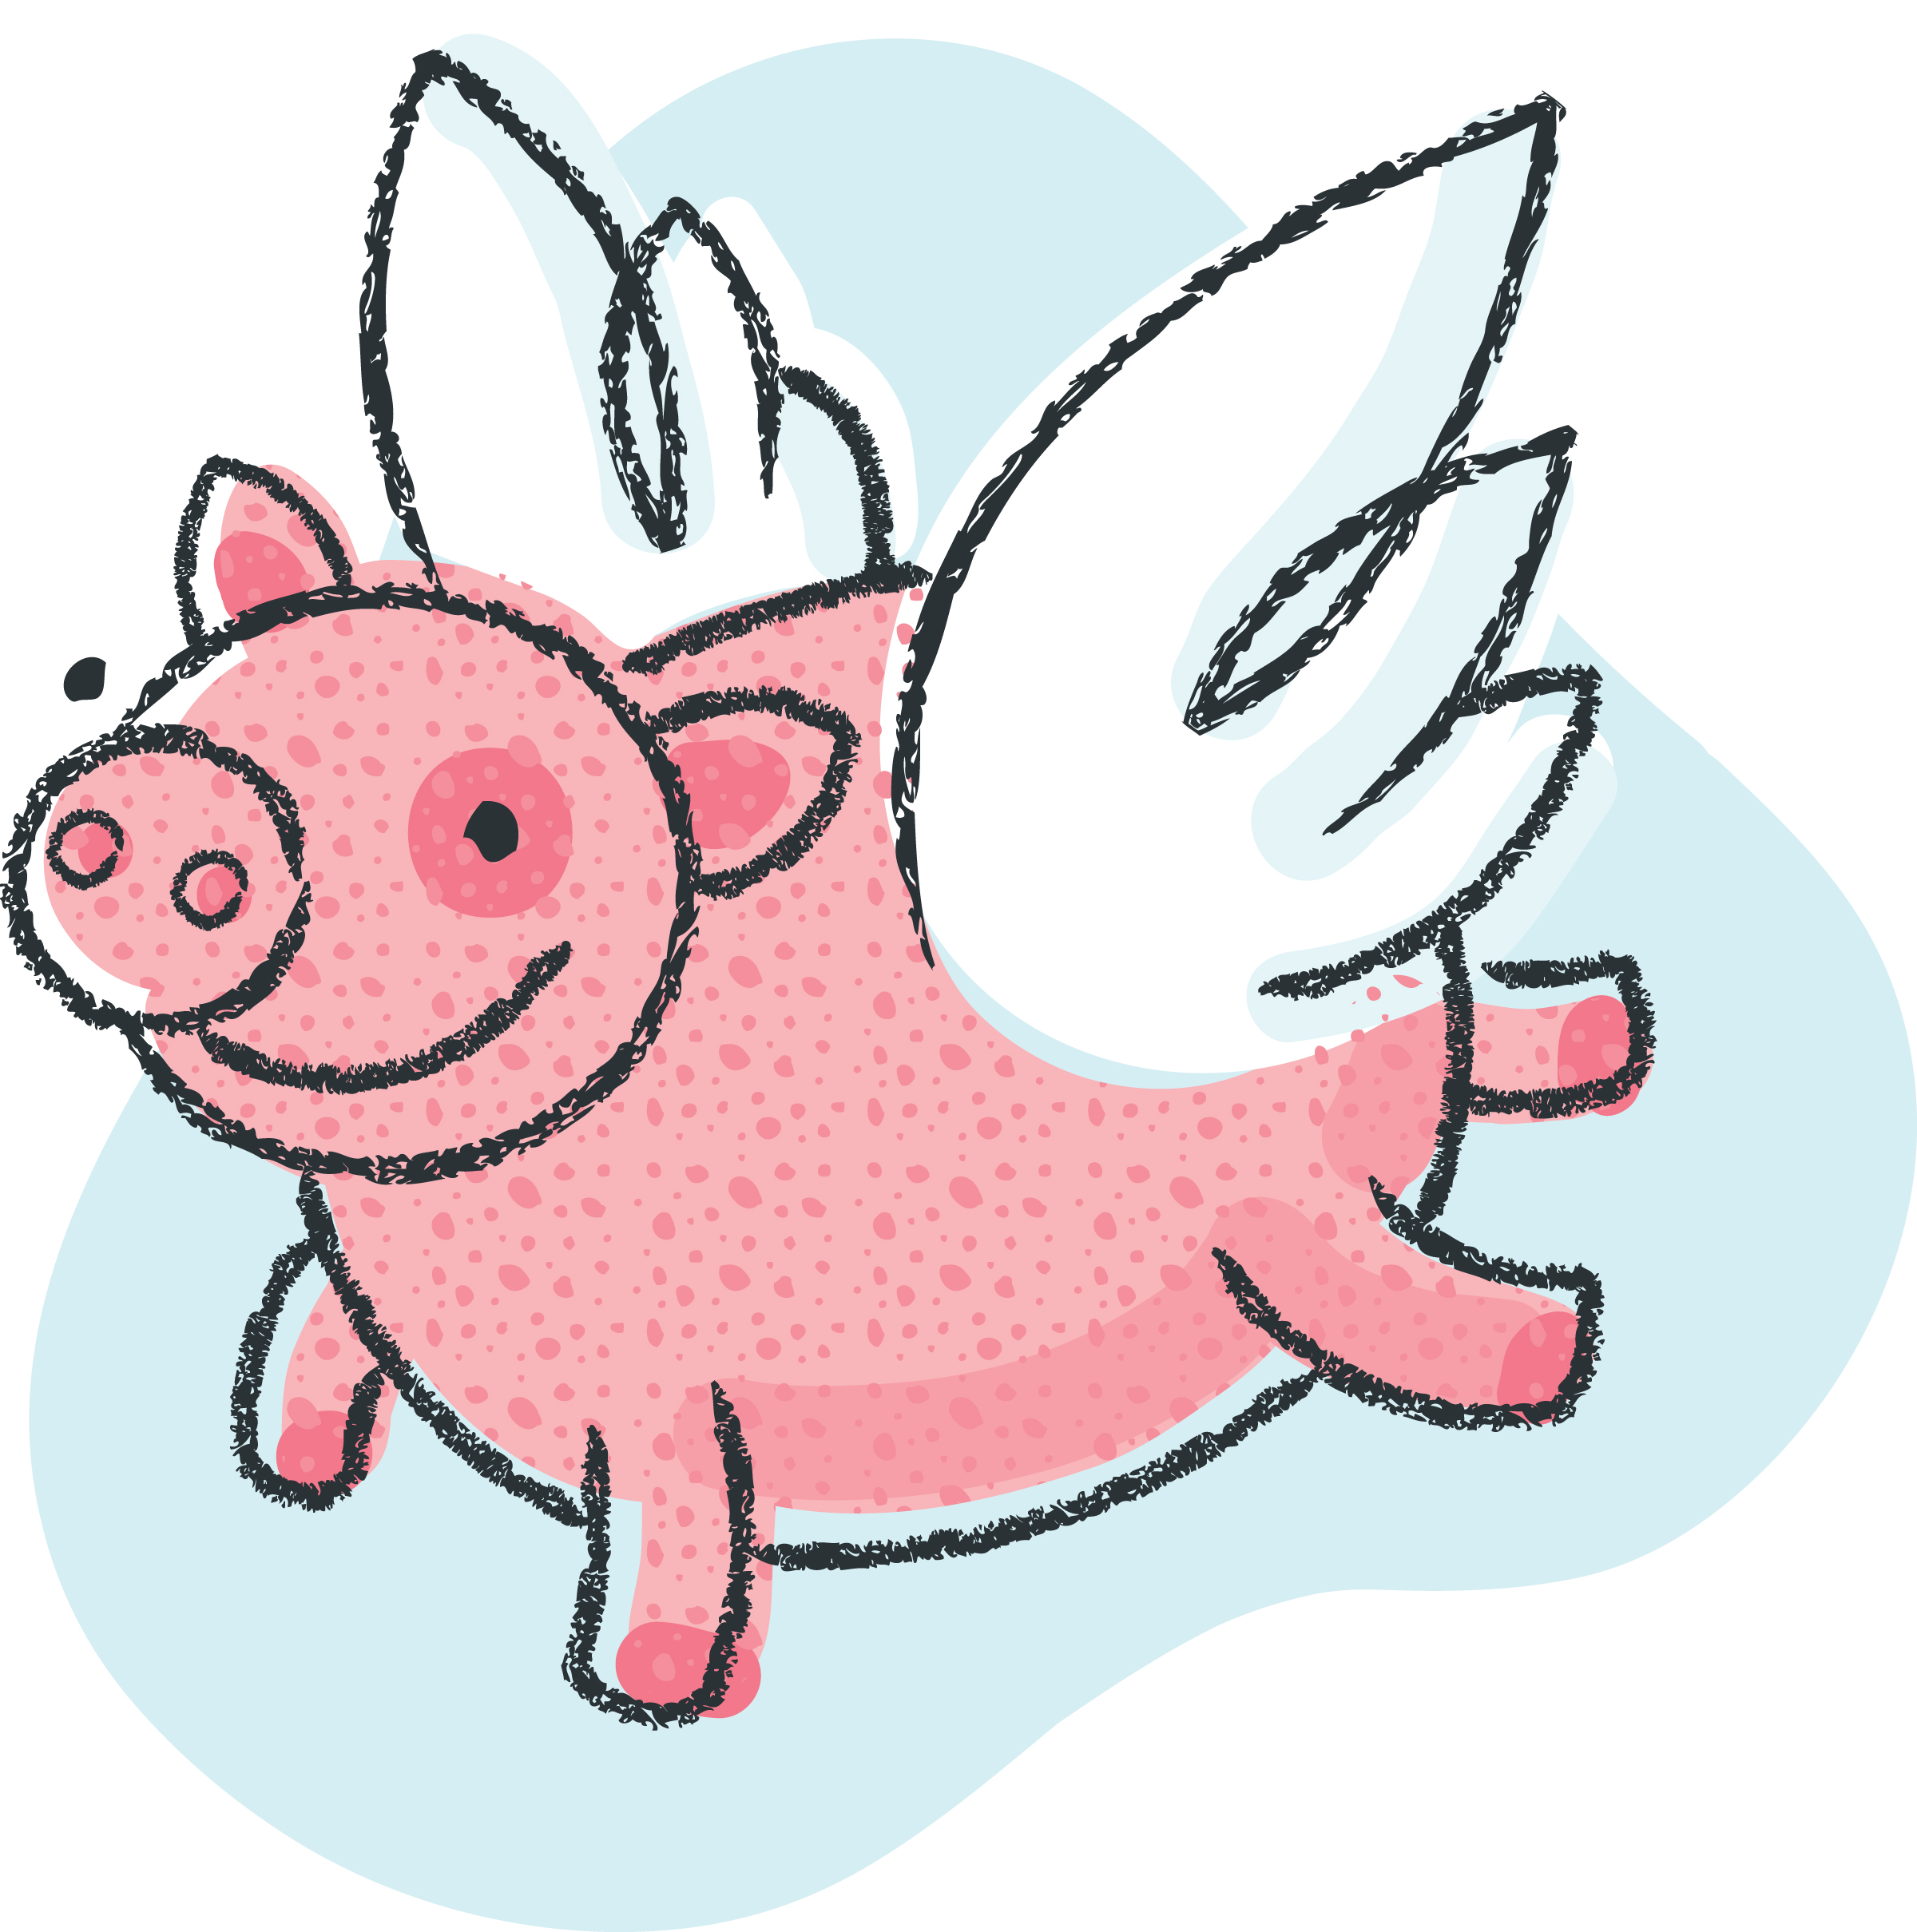 clipart of a pig - photo #46